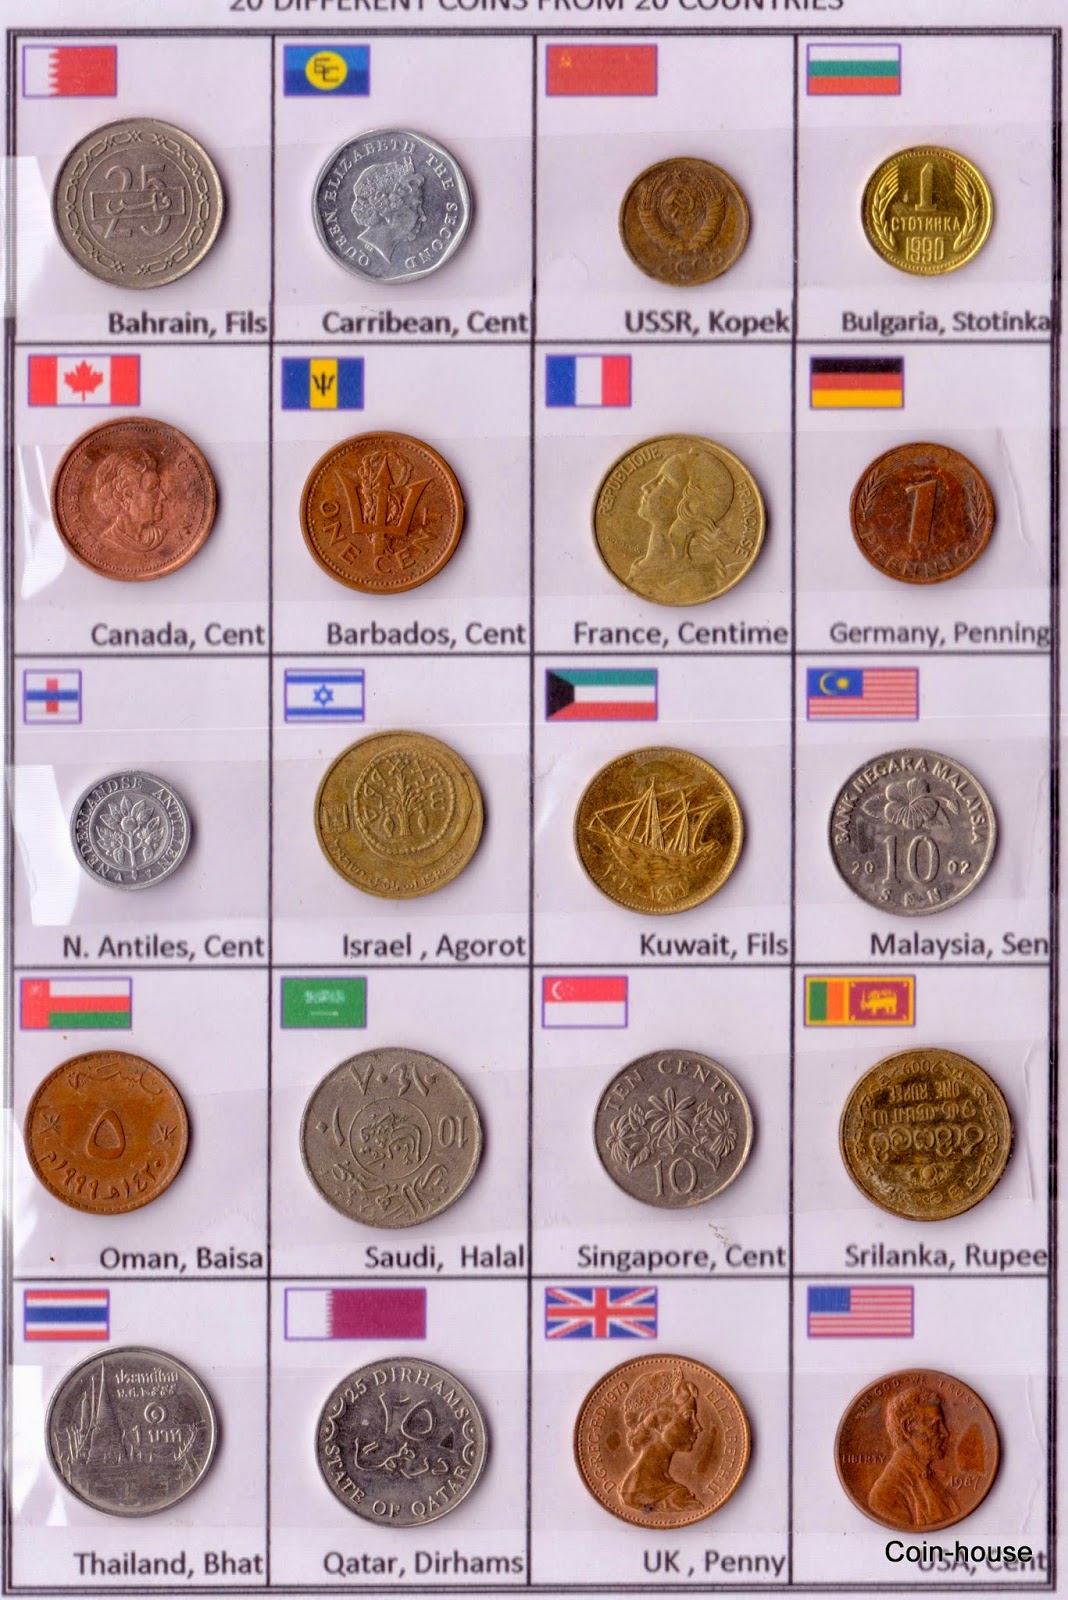 Coin House 20 World Coins From 20 Different Countries